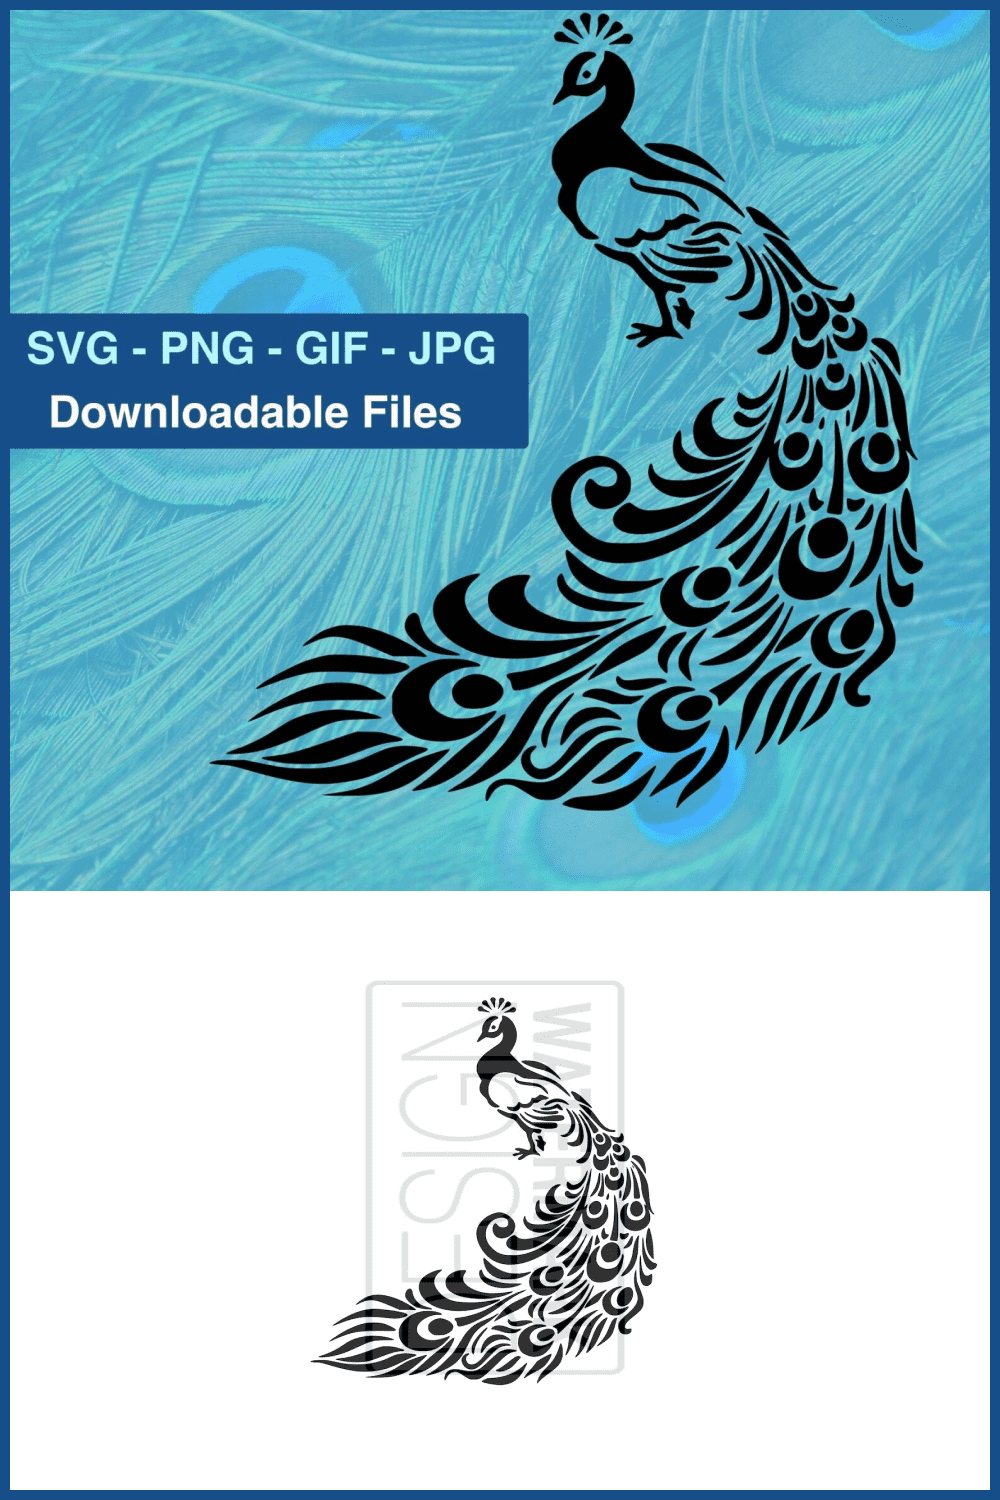 3 peacock cricut silhouette cameo cut files digital clipart instant download image files svg png jpg gif